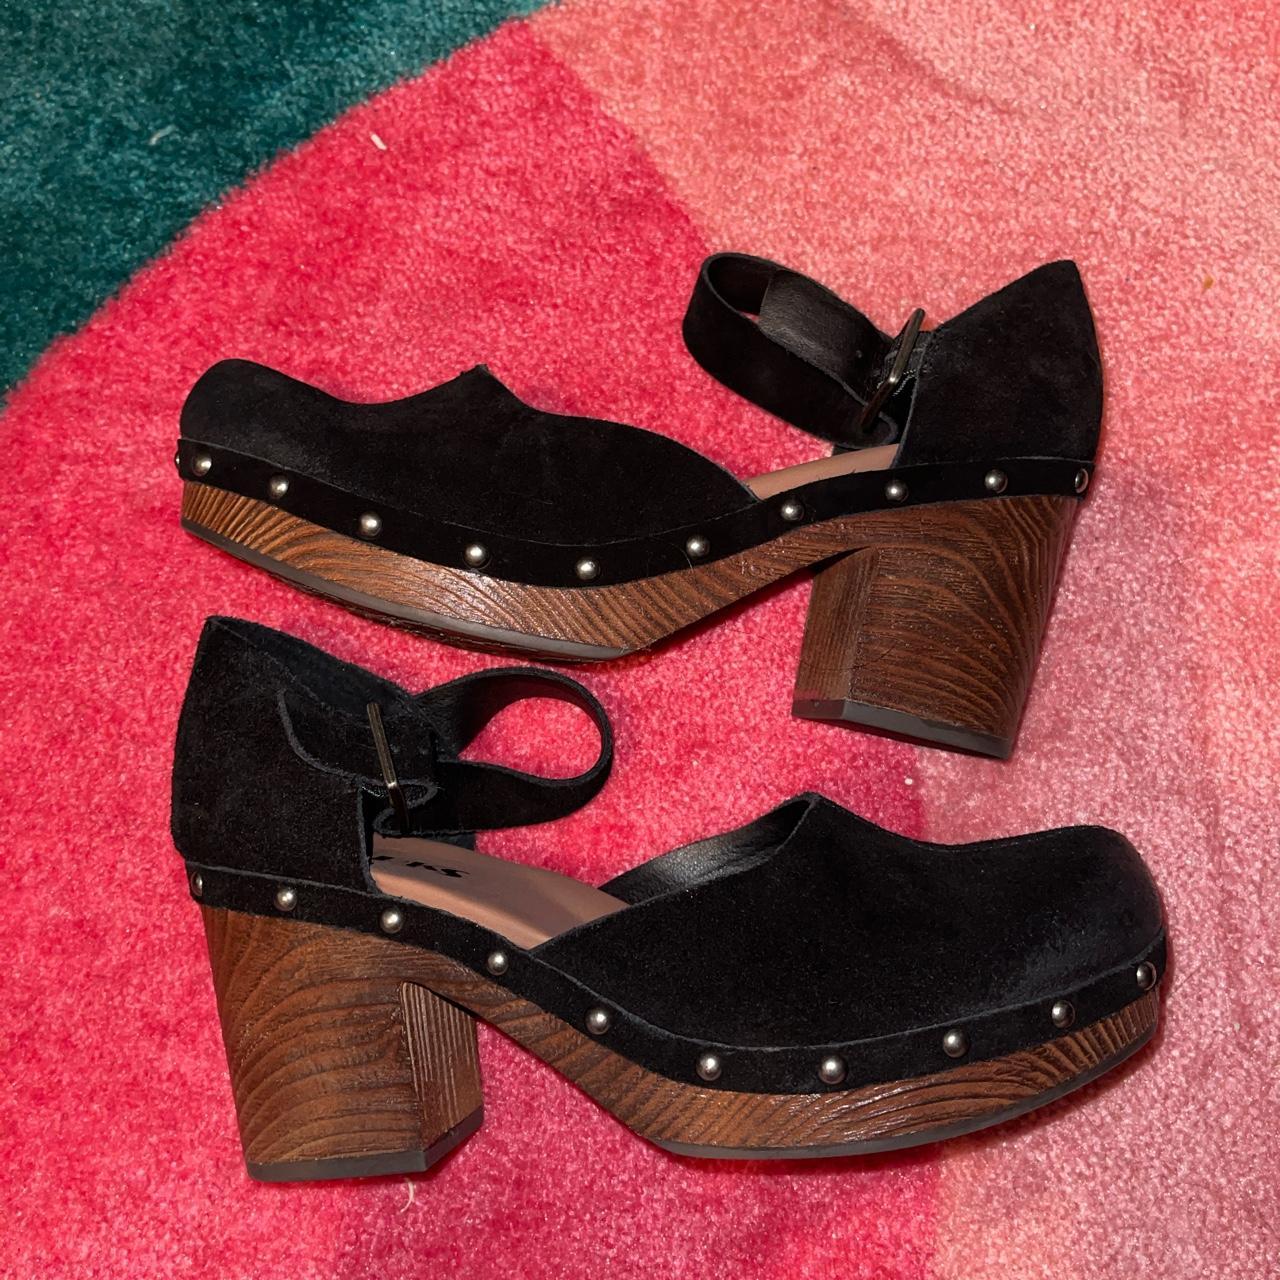 Korks Women's Black and Brown Clogs (2)